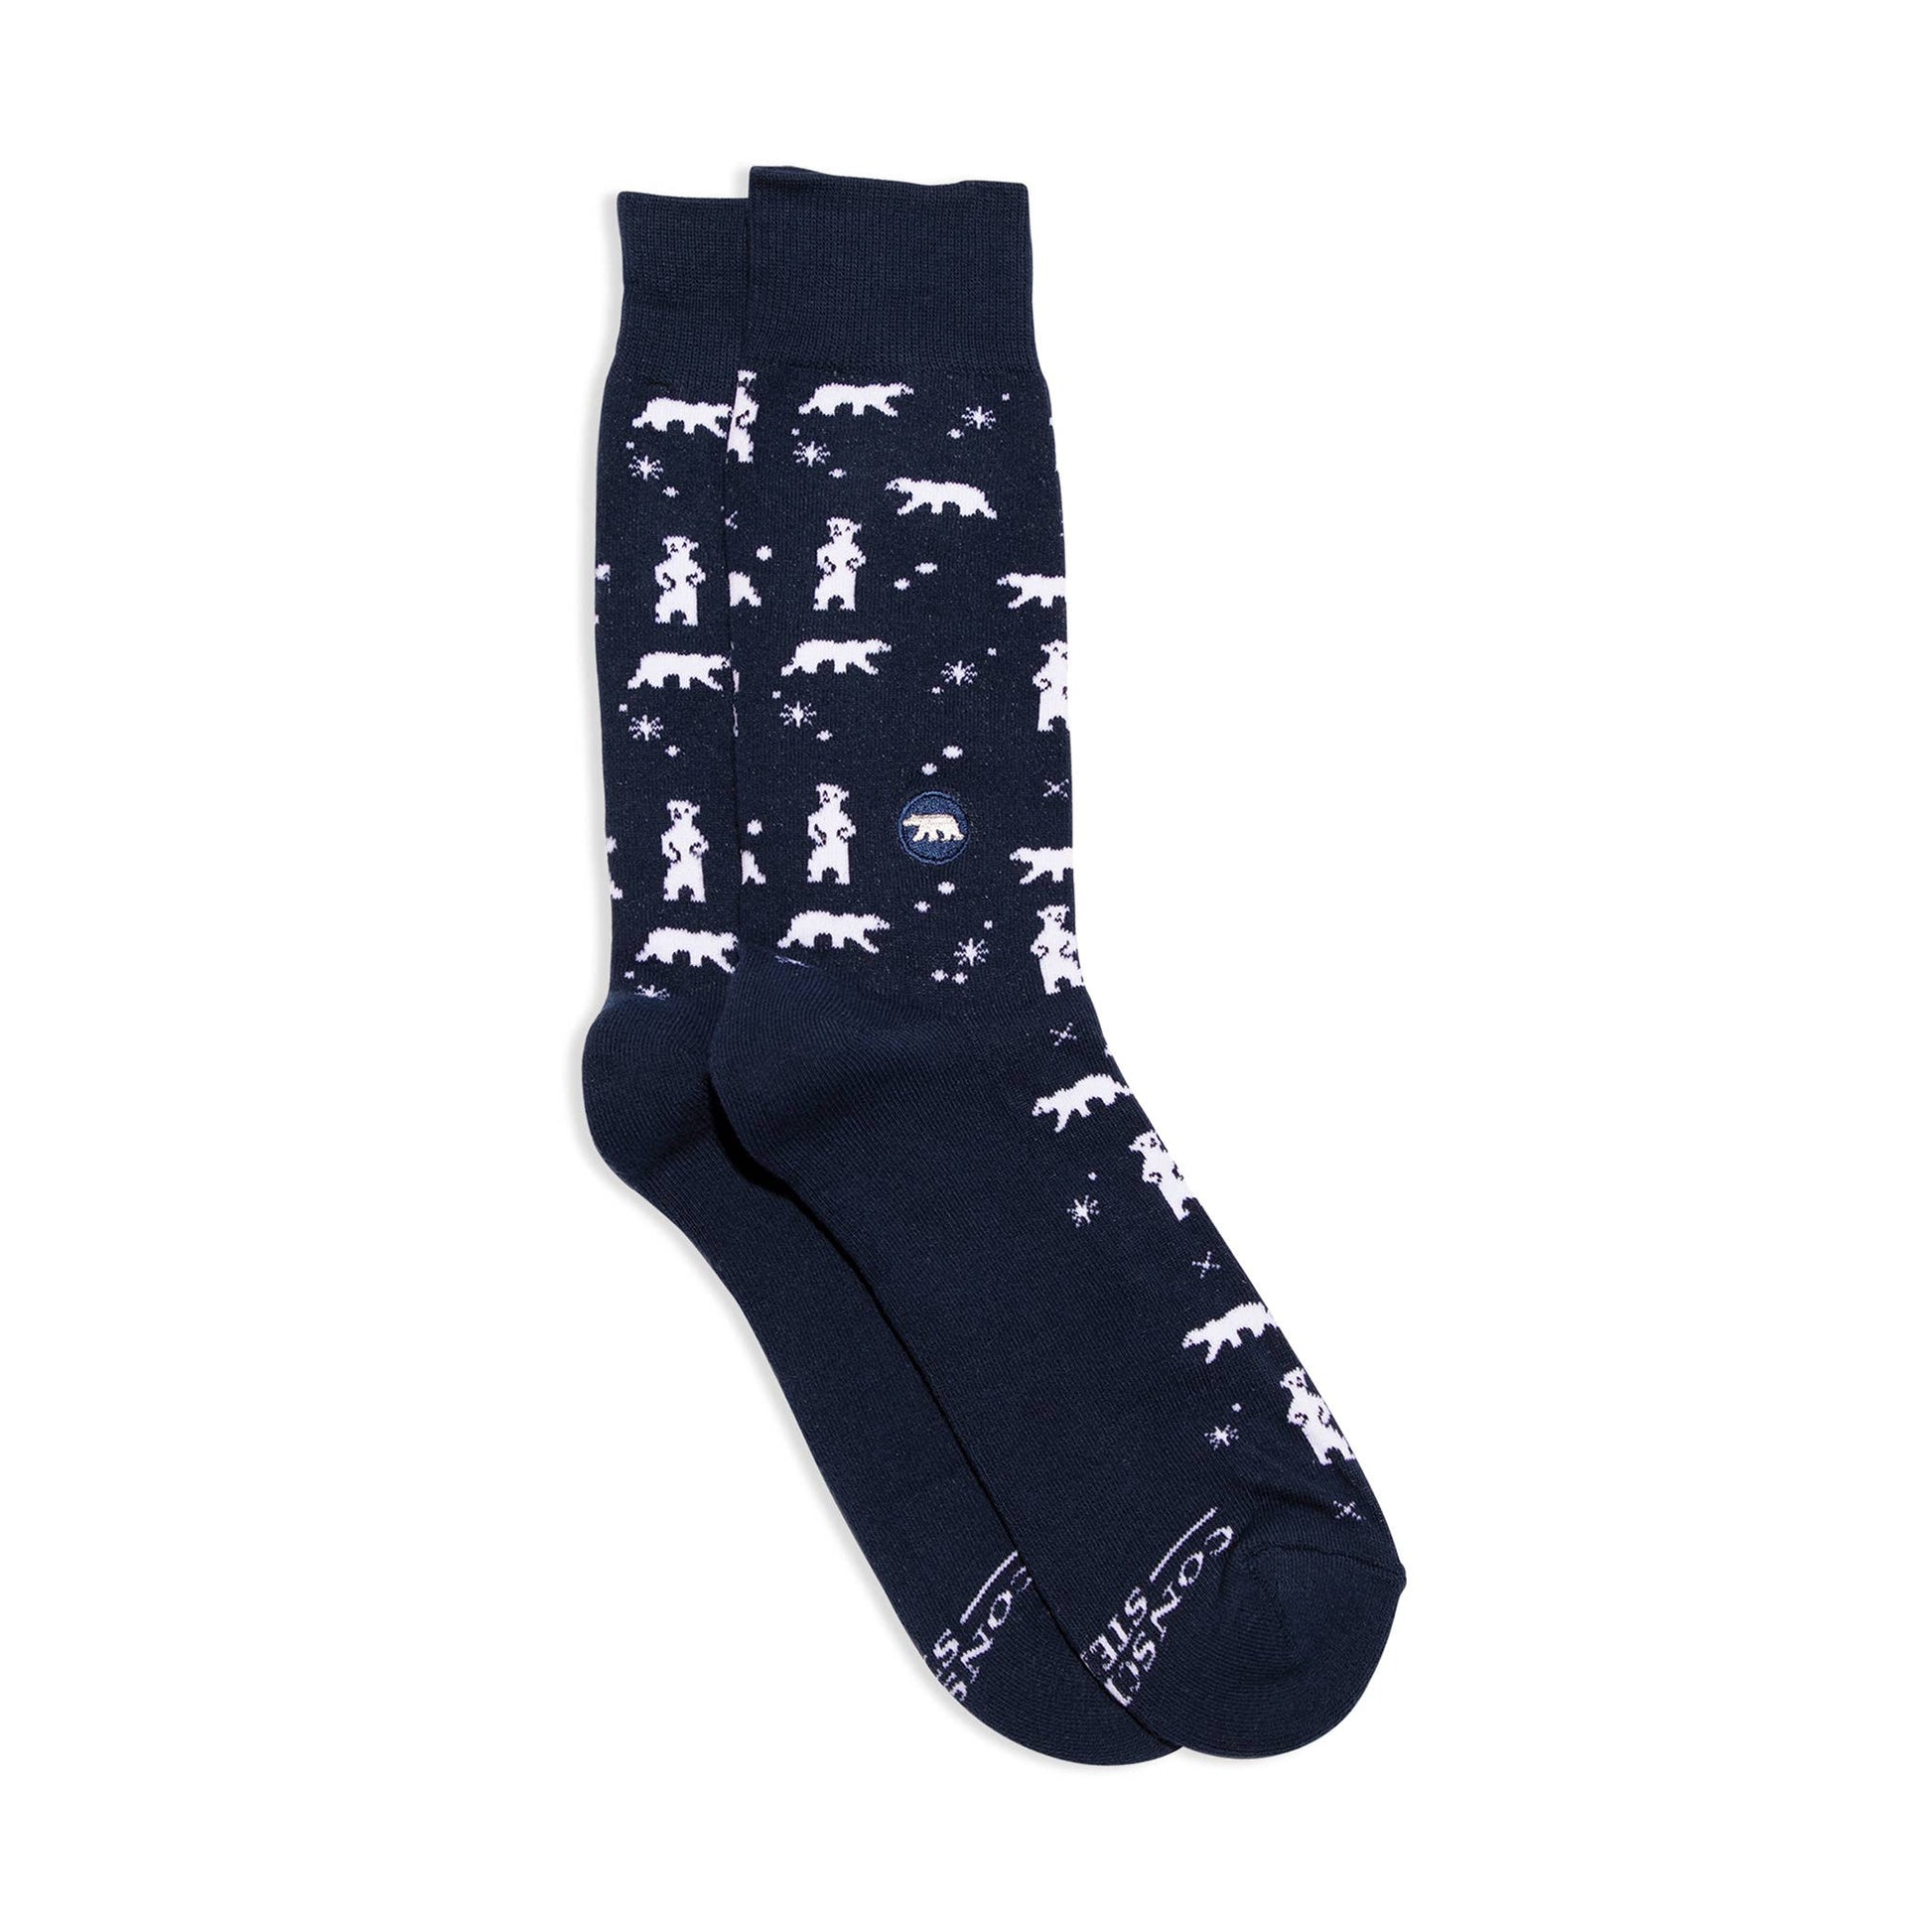 Conscious Step - Socks that Protect Polar Bears  Conscious Step   -better made easy-eco-friendly-sustainable-gifting